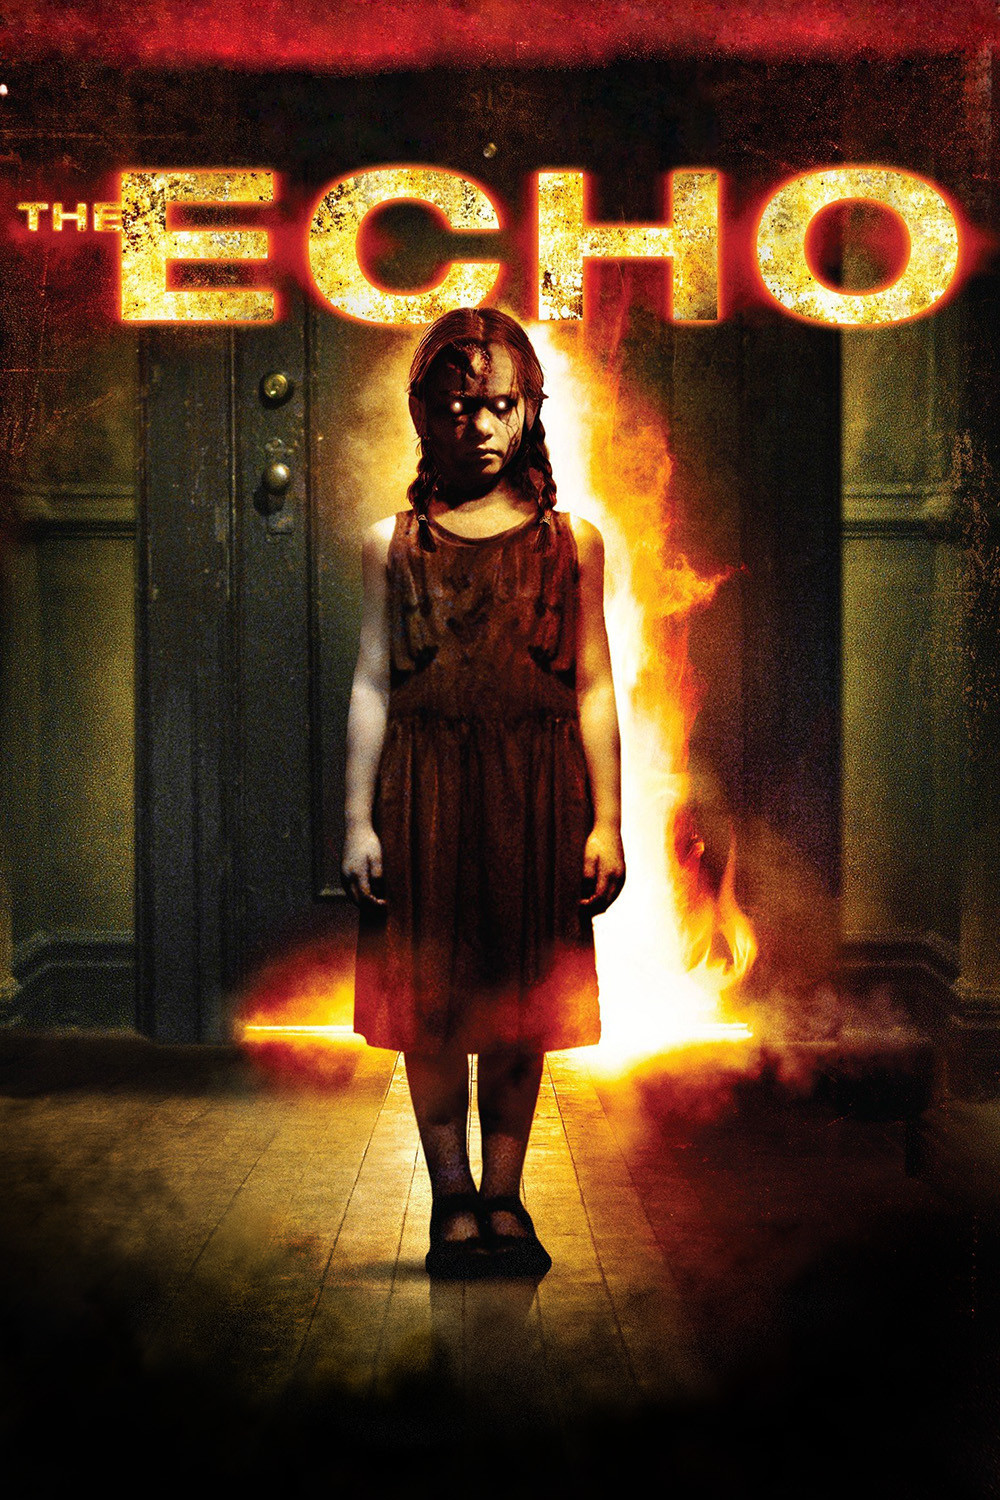 Poster for the movie "The Echo"